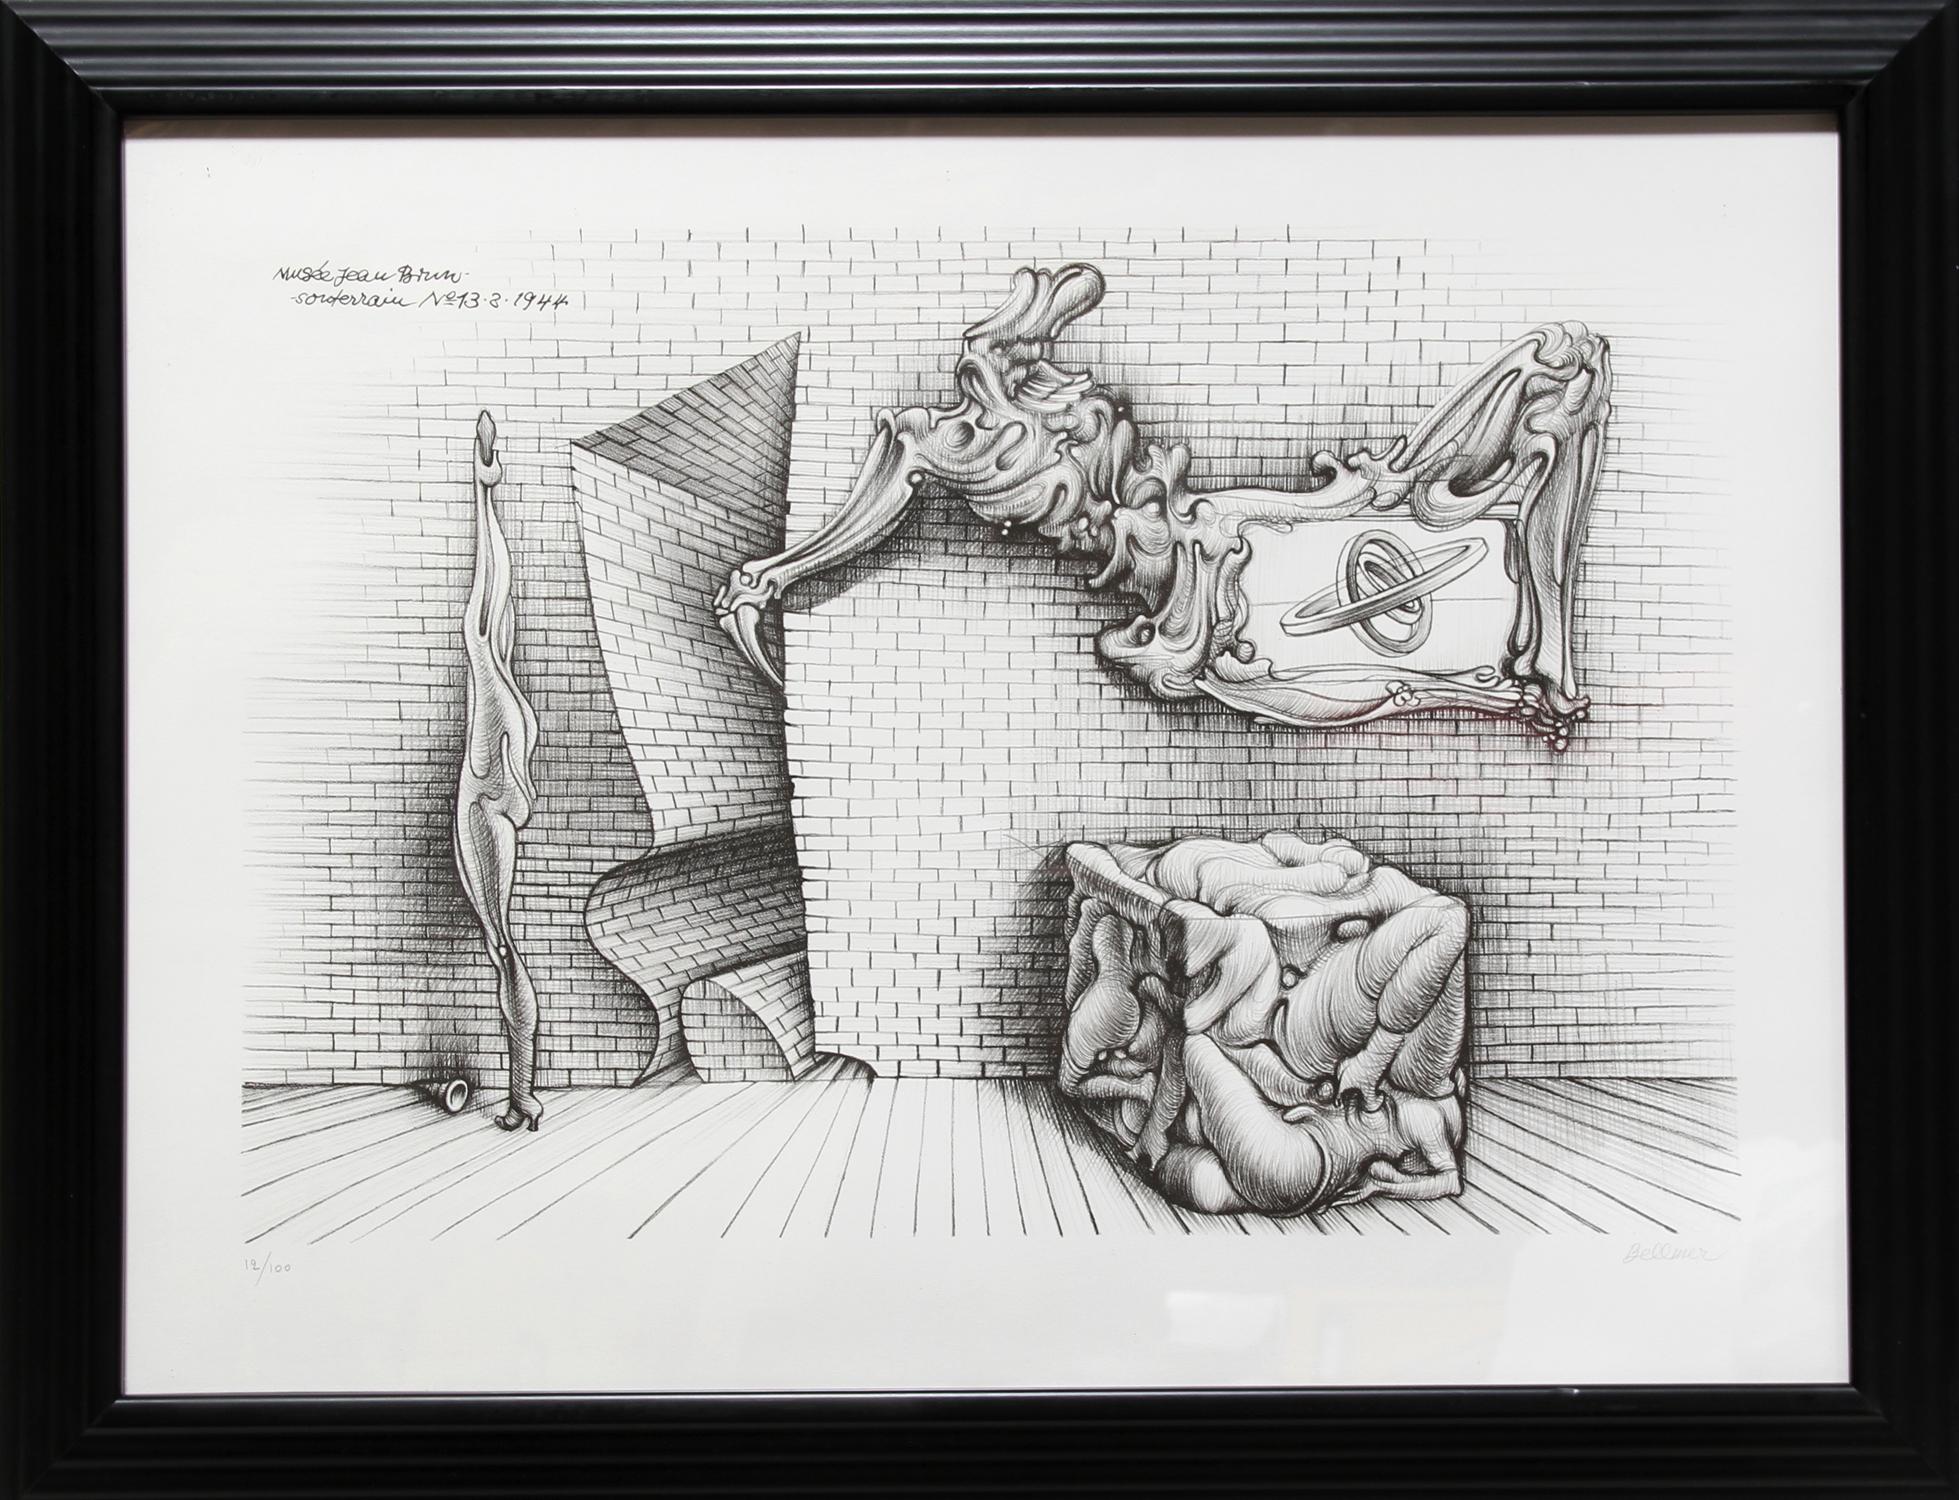 Artist: Hans Bellmer, German (1902 - 1975)
Title: Souterrain No. 13
Year: circa 1965
Medium:	Lithograph on BFK Rives, signed and numbered in pencil
Edition: 100
Paper Size: 19.5 x 26.5 inches
Frame: 25.5 x 31 inches